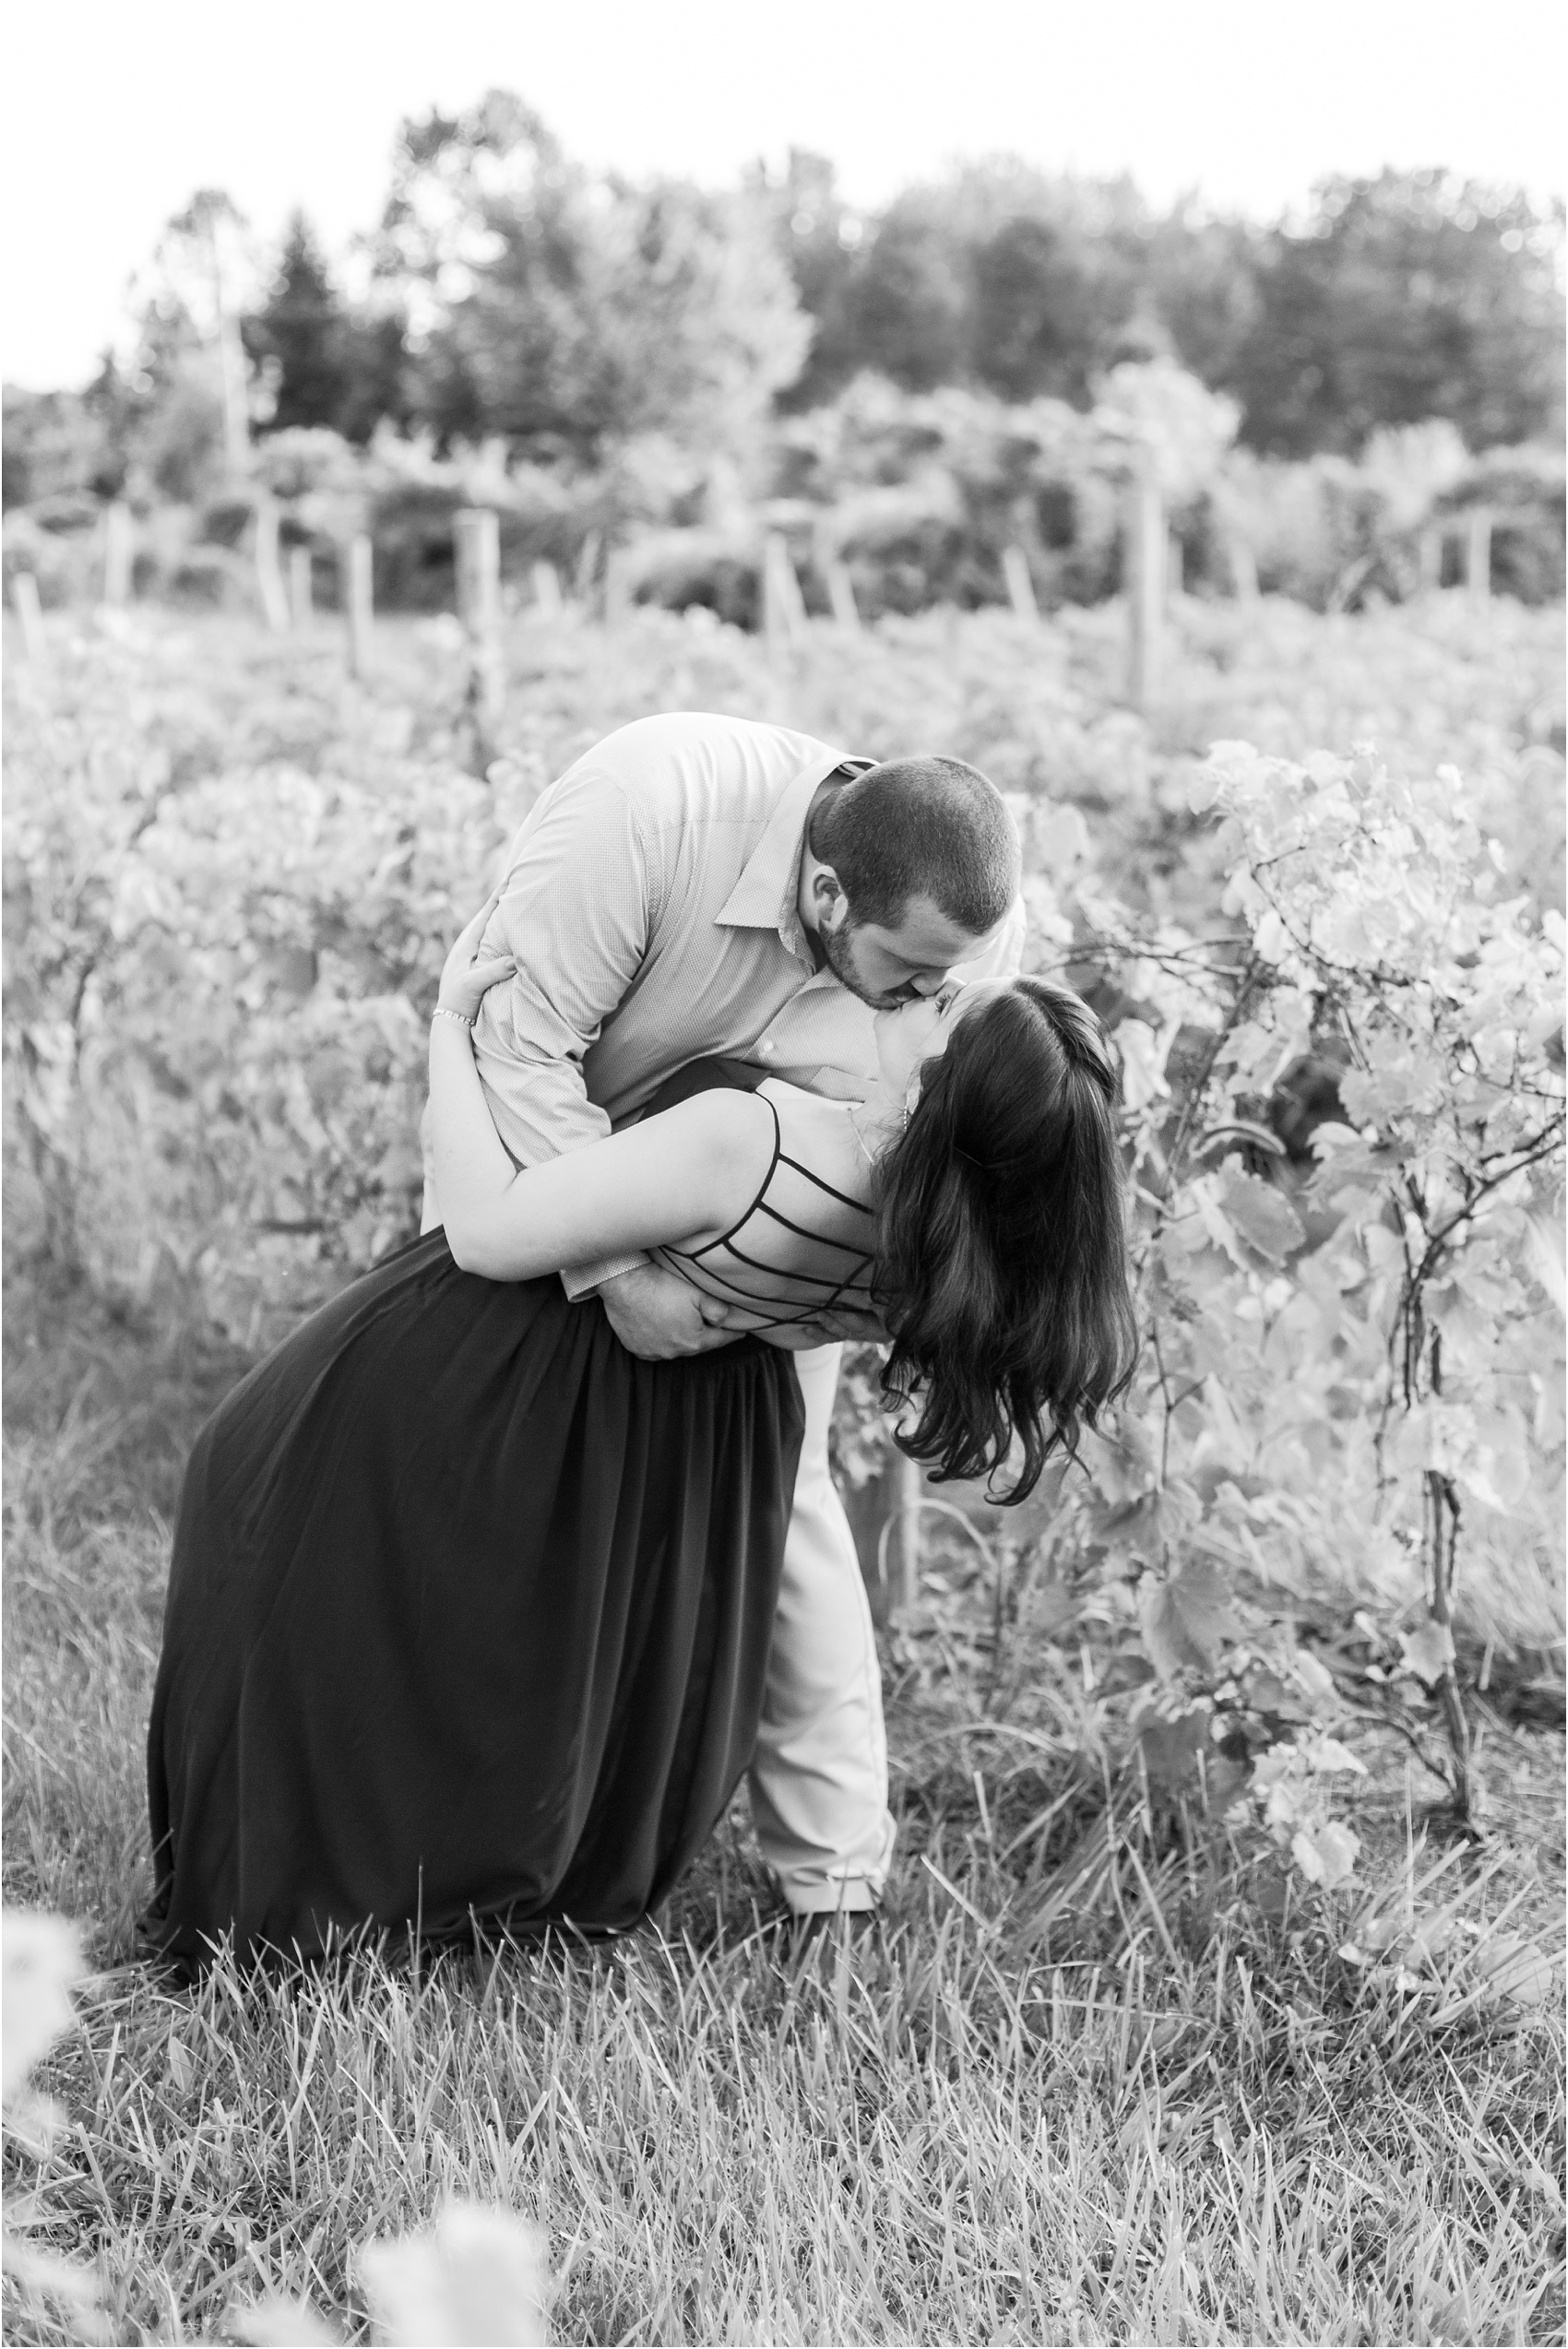 candid-romantic-summer-engagement-photos-at-hidden-lake-gardens-and-black-fire-winery-in-tipton-mi-by-courtney-carolyn-photography_0016.jpg